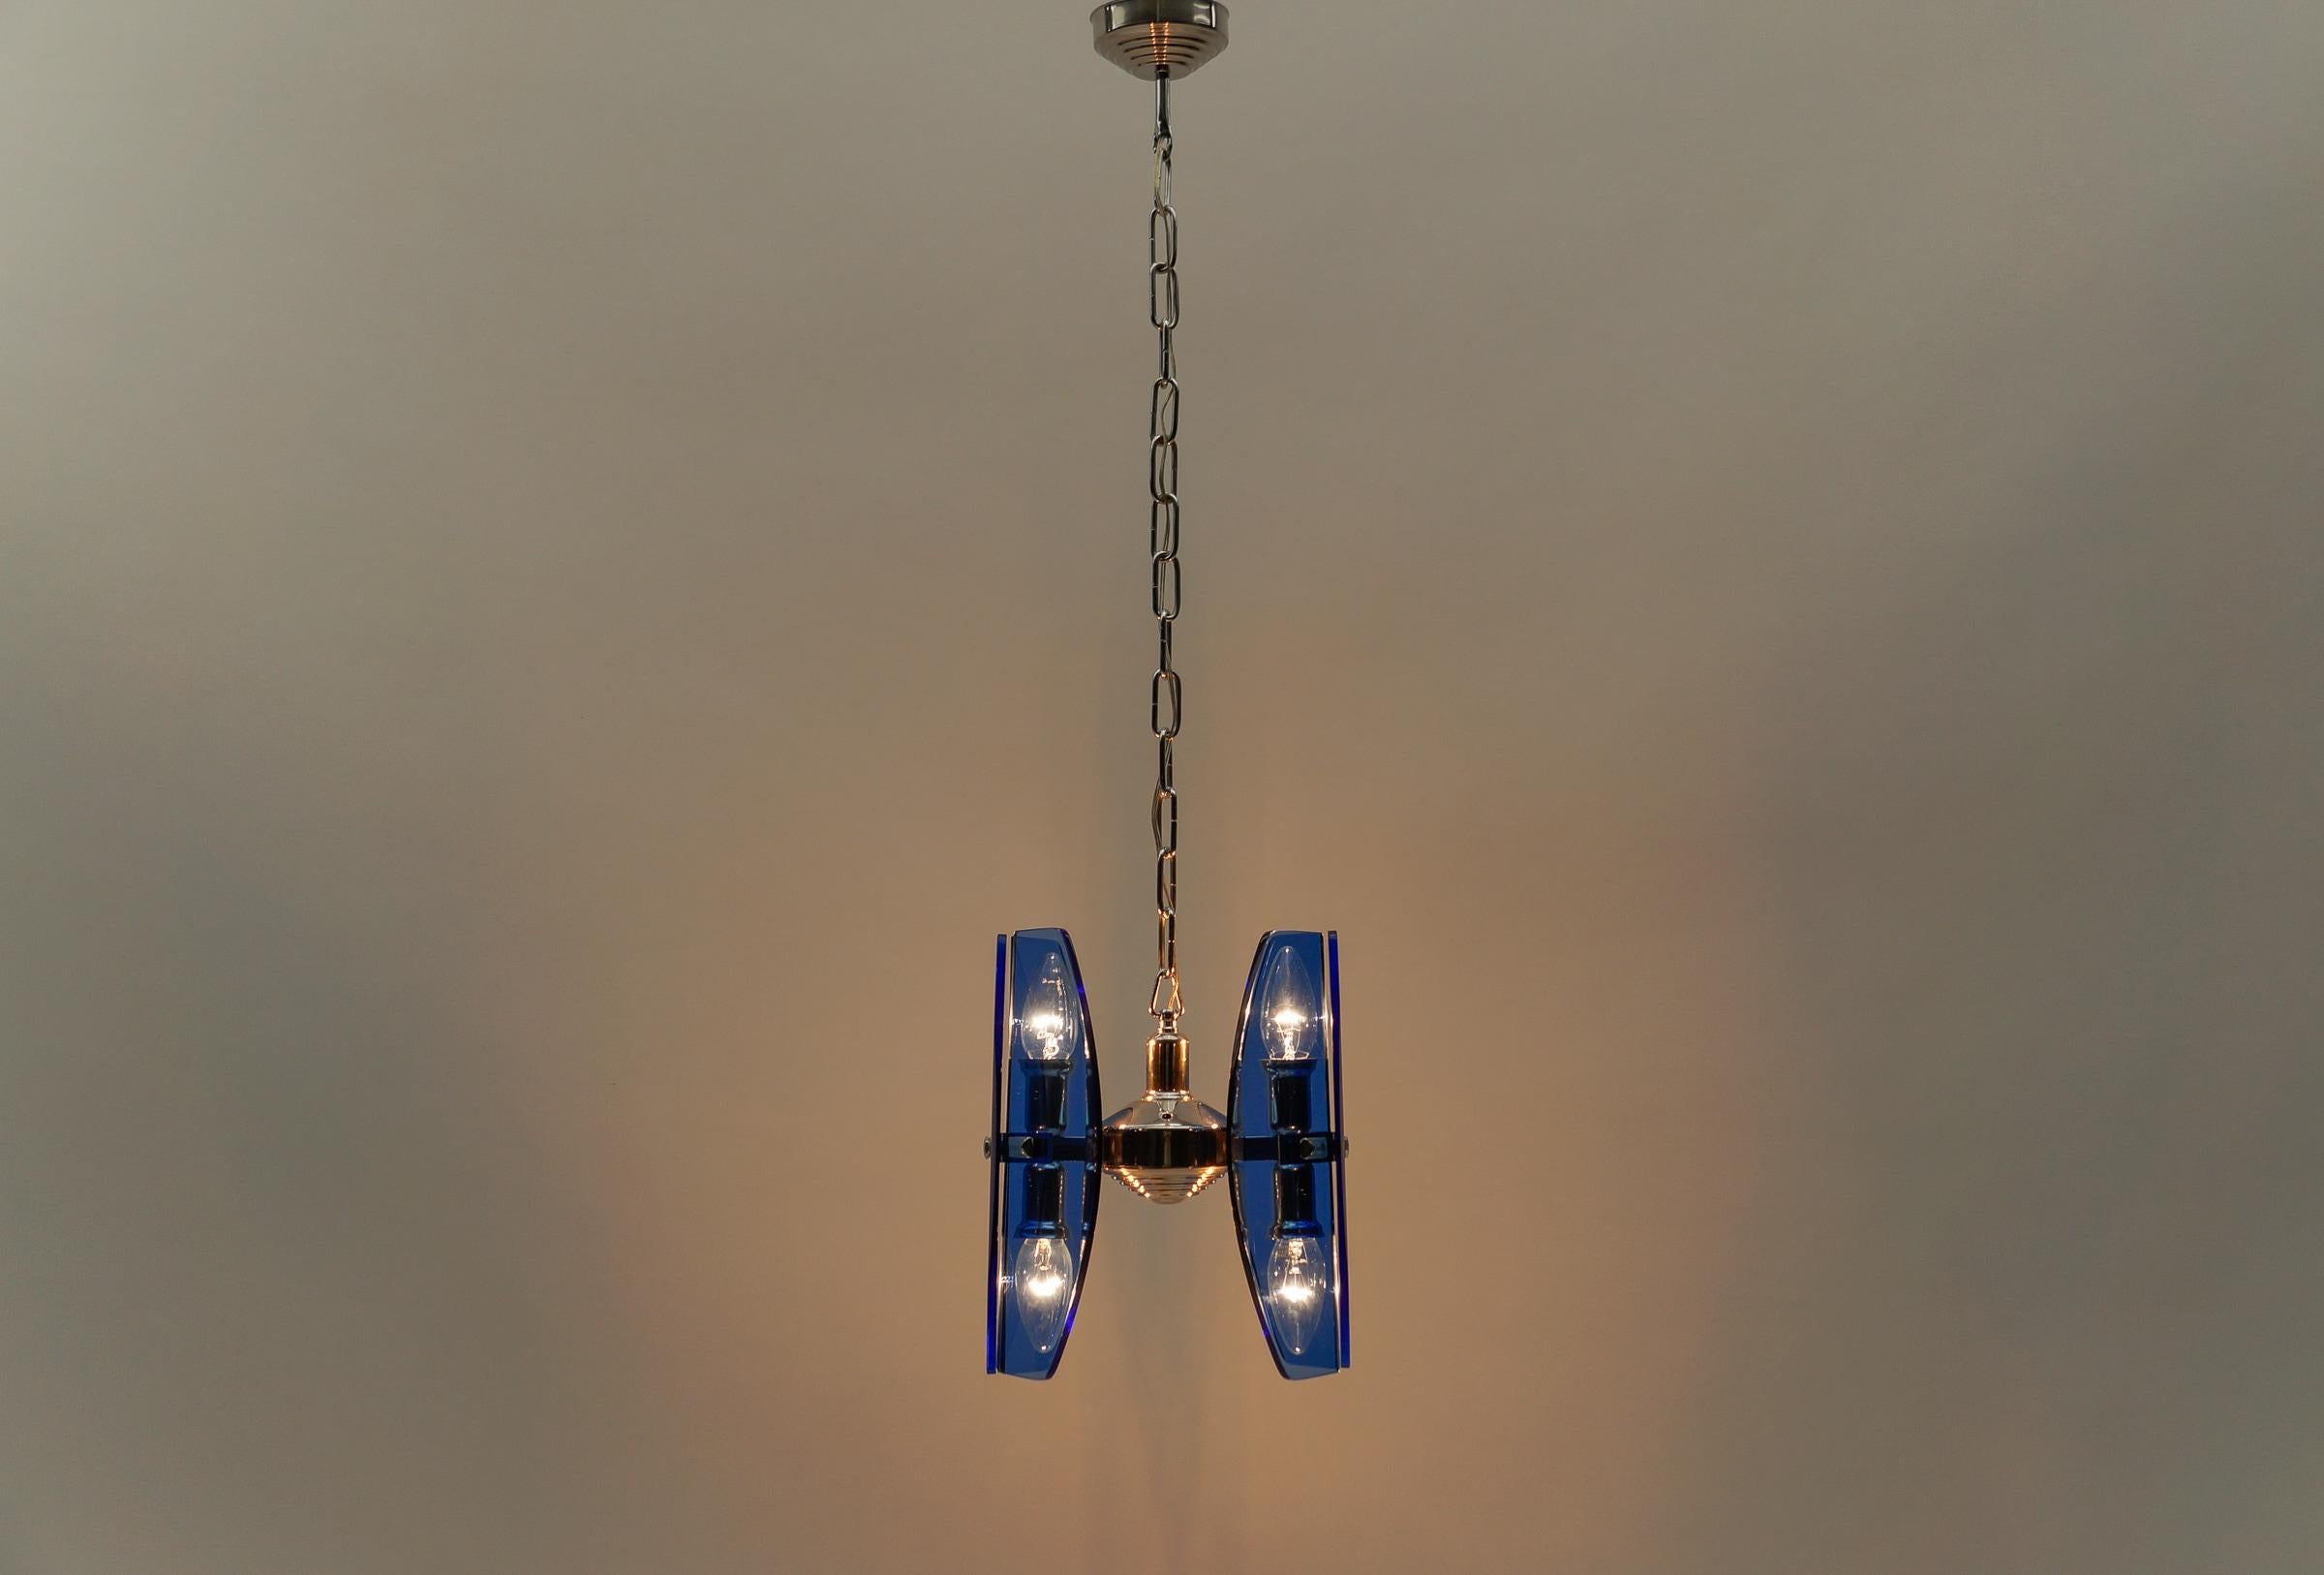 Italian 2. of 2 Mid-Century Modern Ceiling Lamp by Antonio Lupi for VECA Italy, 1960s For Sale